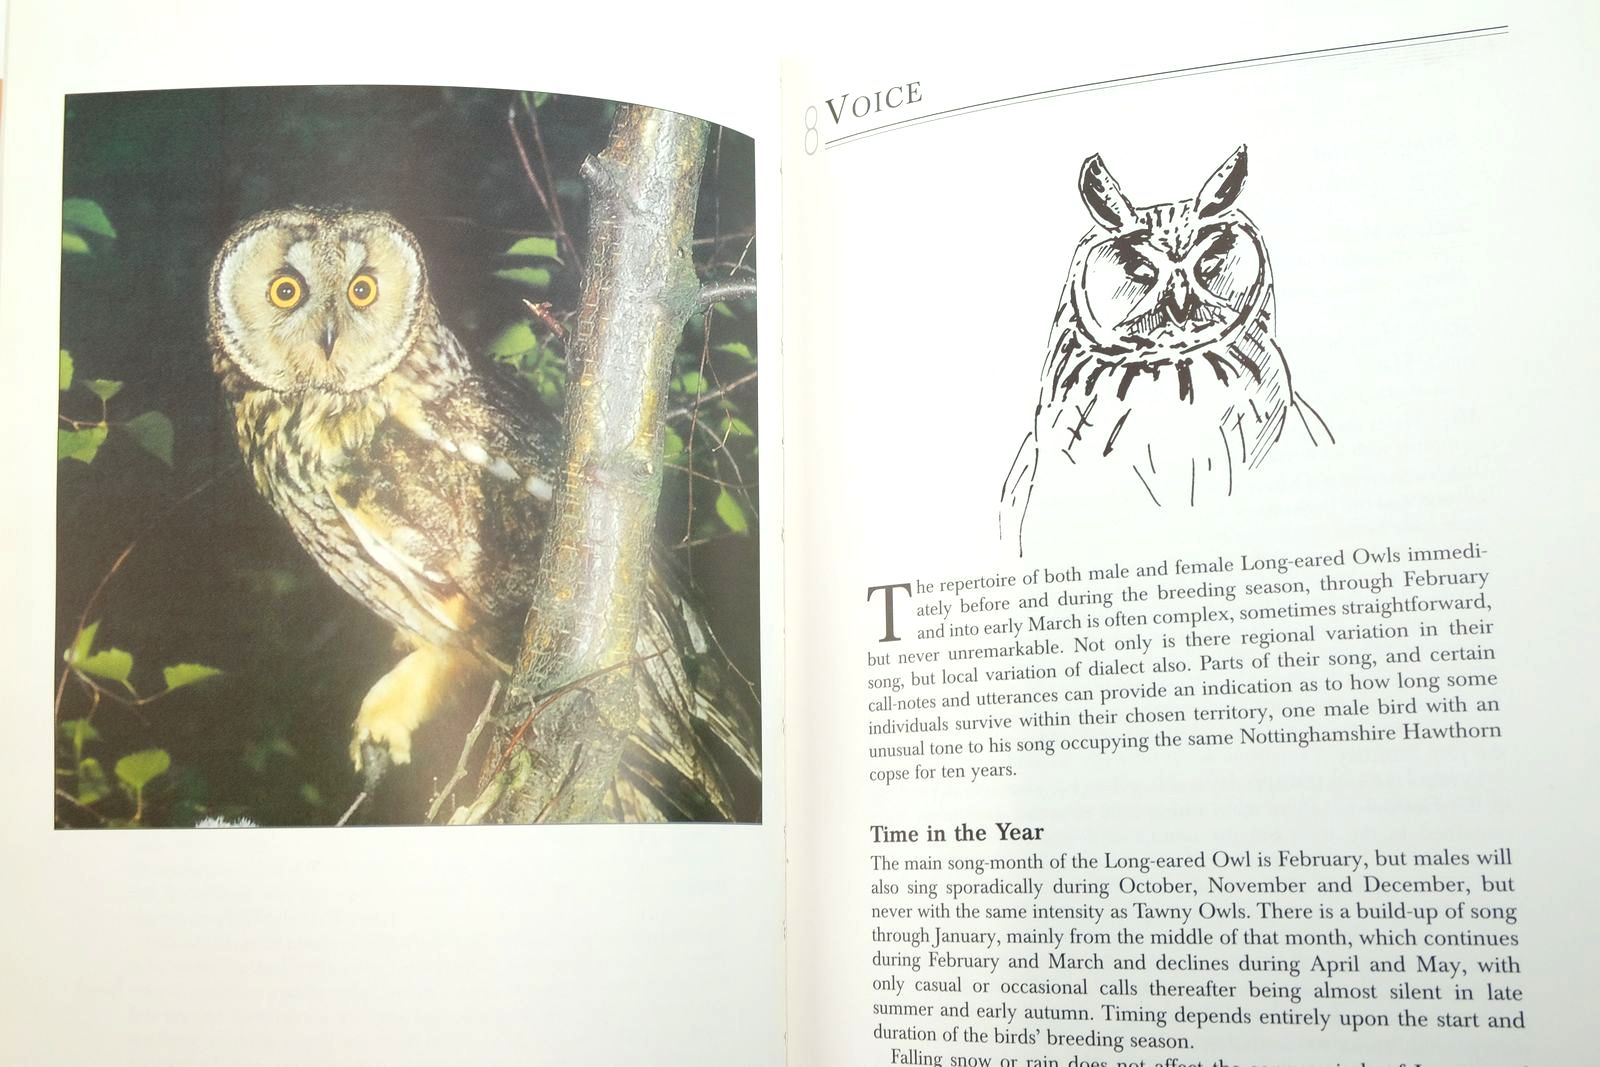 Photo of THE LONG-EARED OWL written by Scott, Derick published by The Hawk And Owl Trust (STOCK CODE: 2139666)  for sale by Stella & Rose's Books